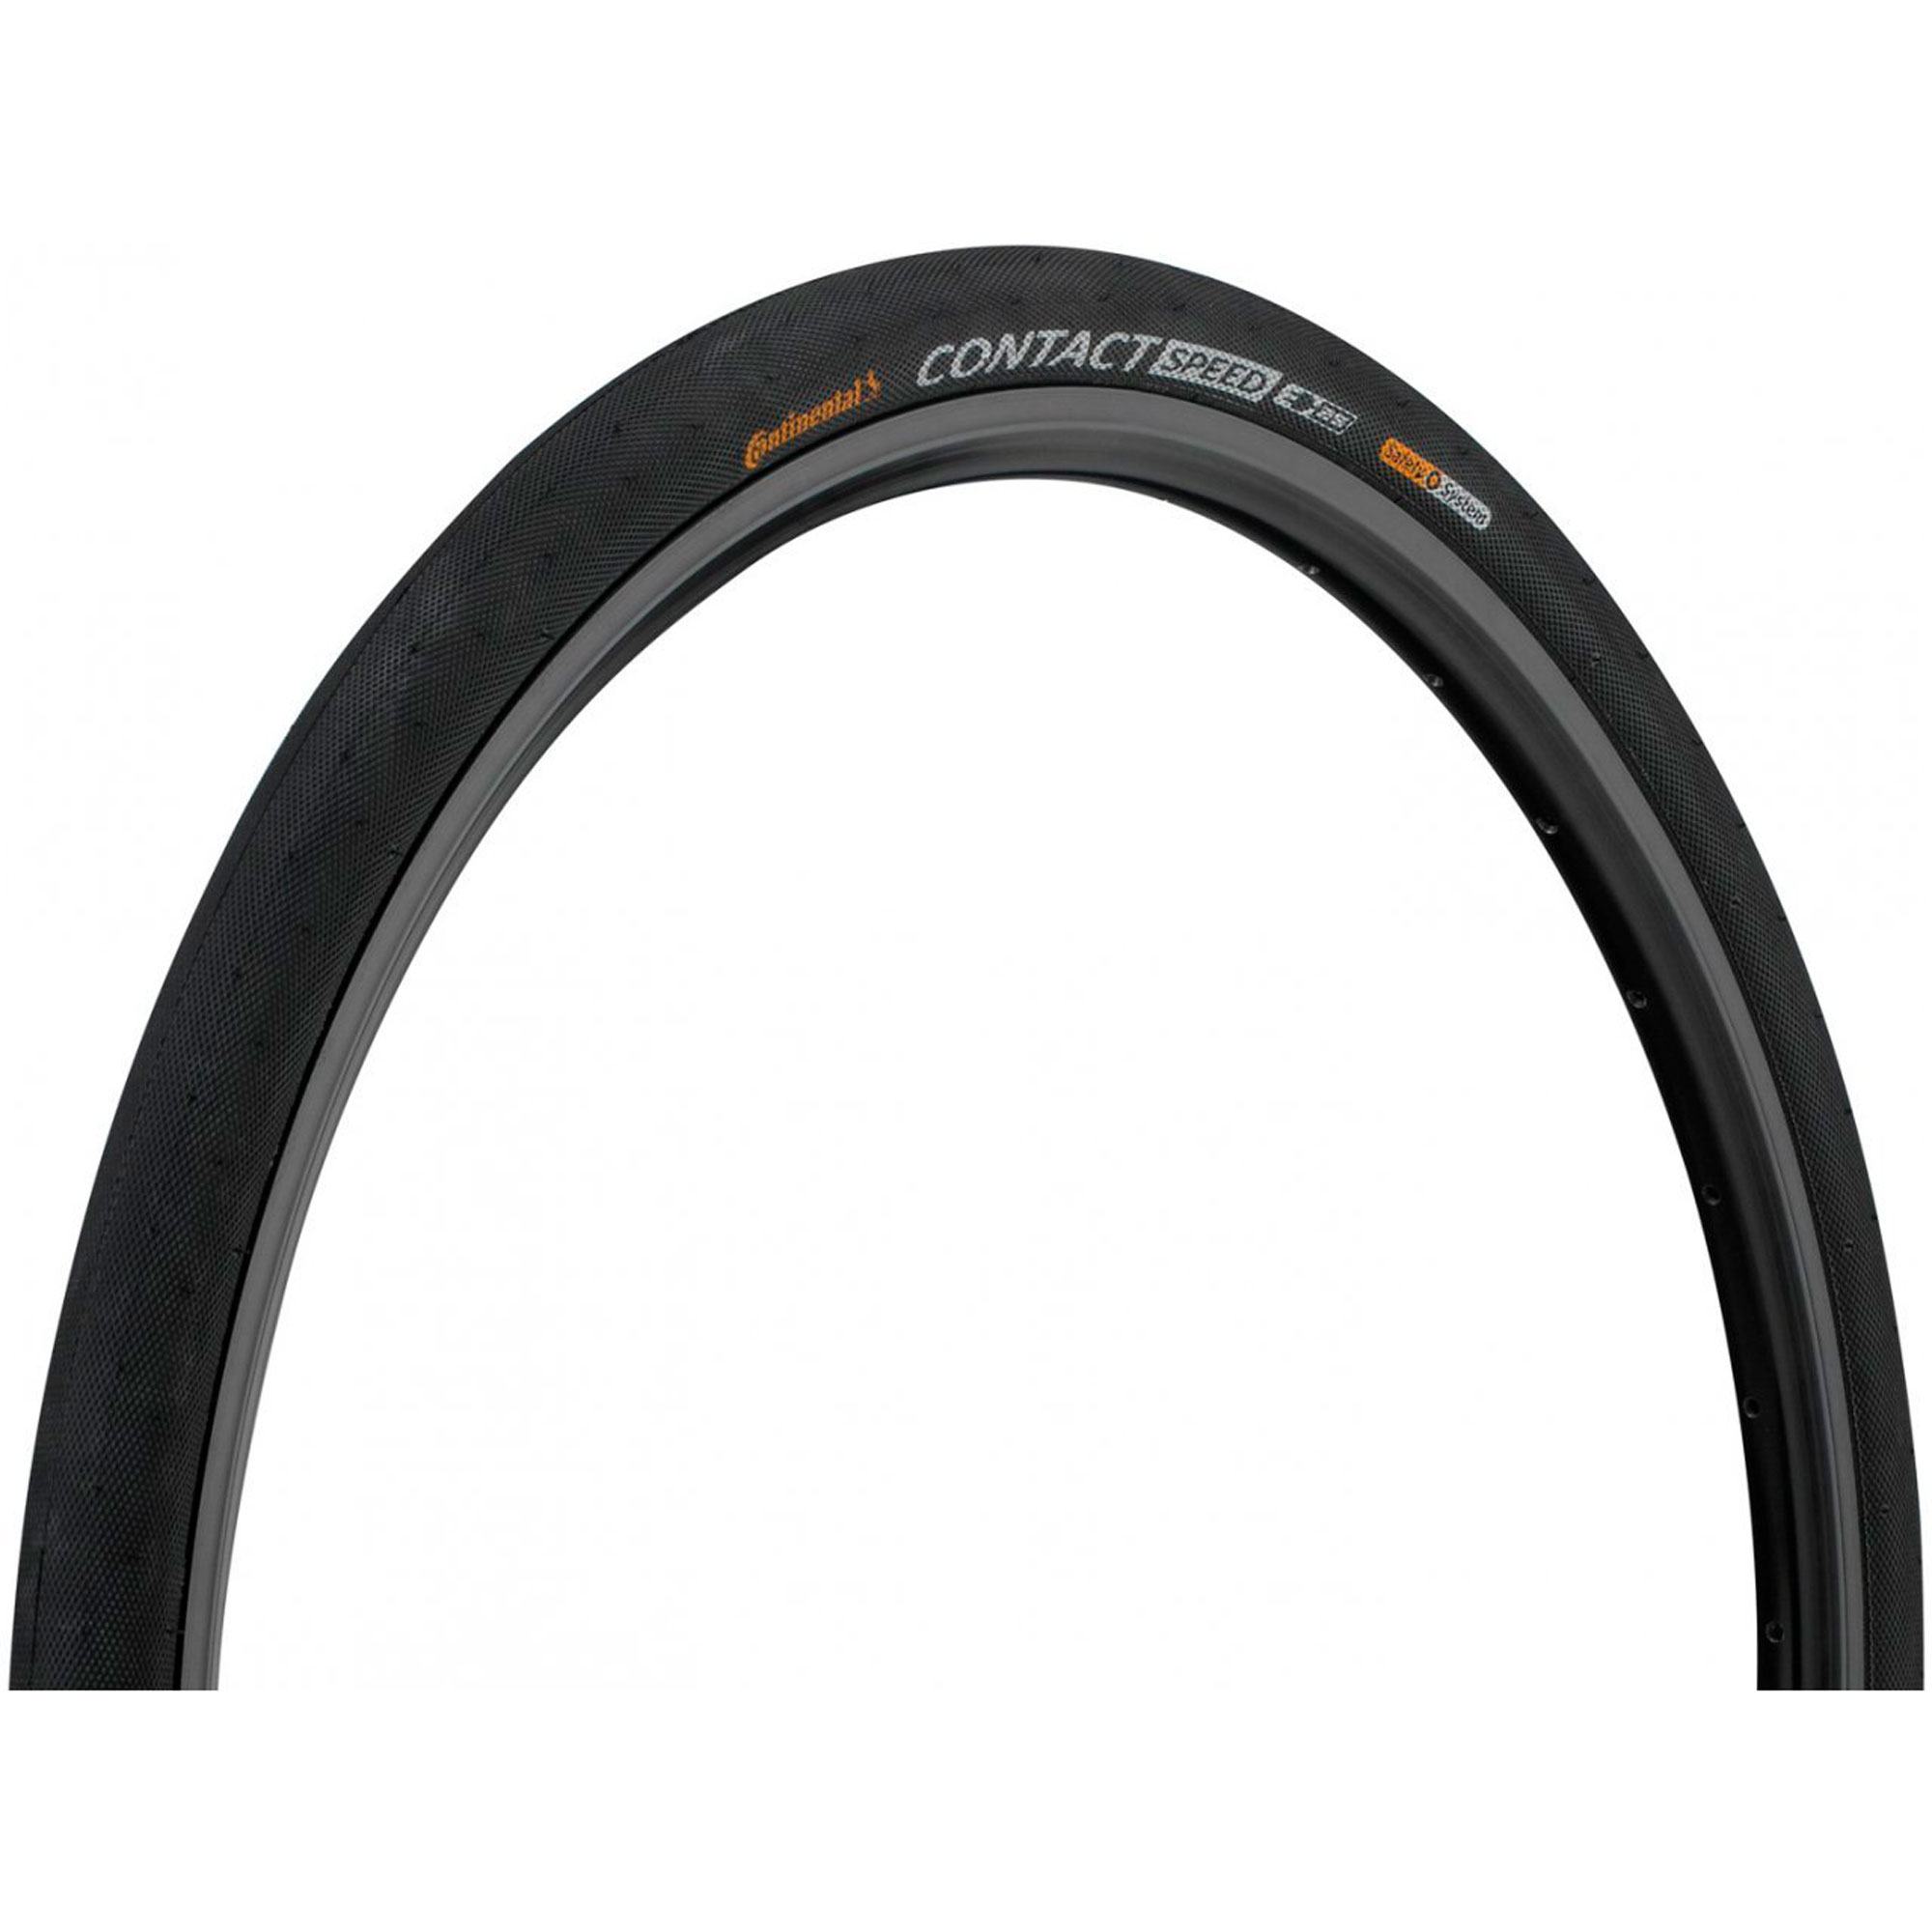 Покришка Continental CONTACT Speed, 28", 700 x 35C (35C), 37-622, Wire, SafetySystem 500гр.